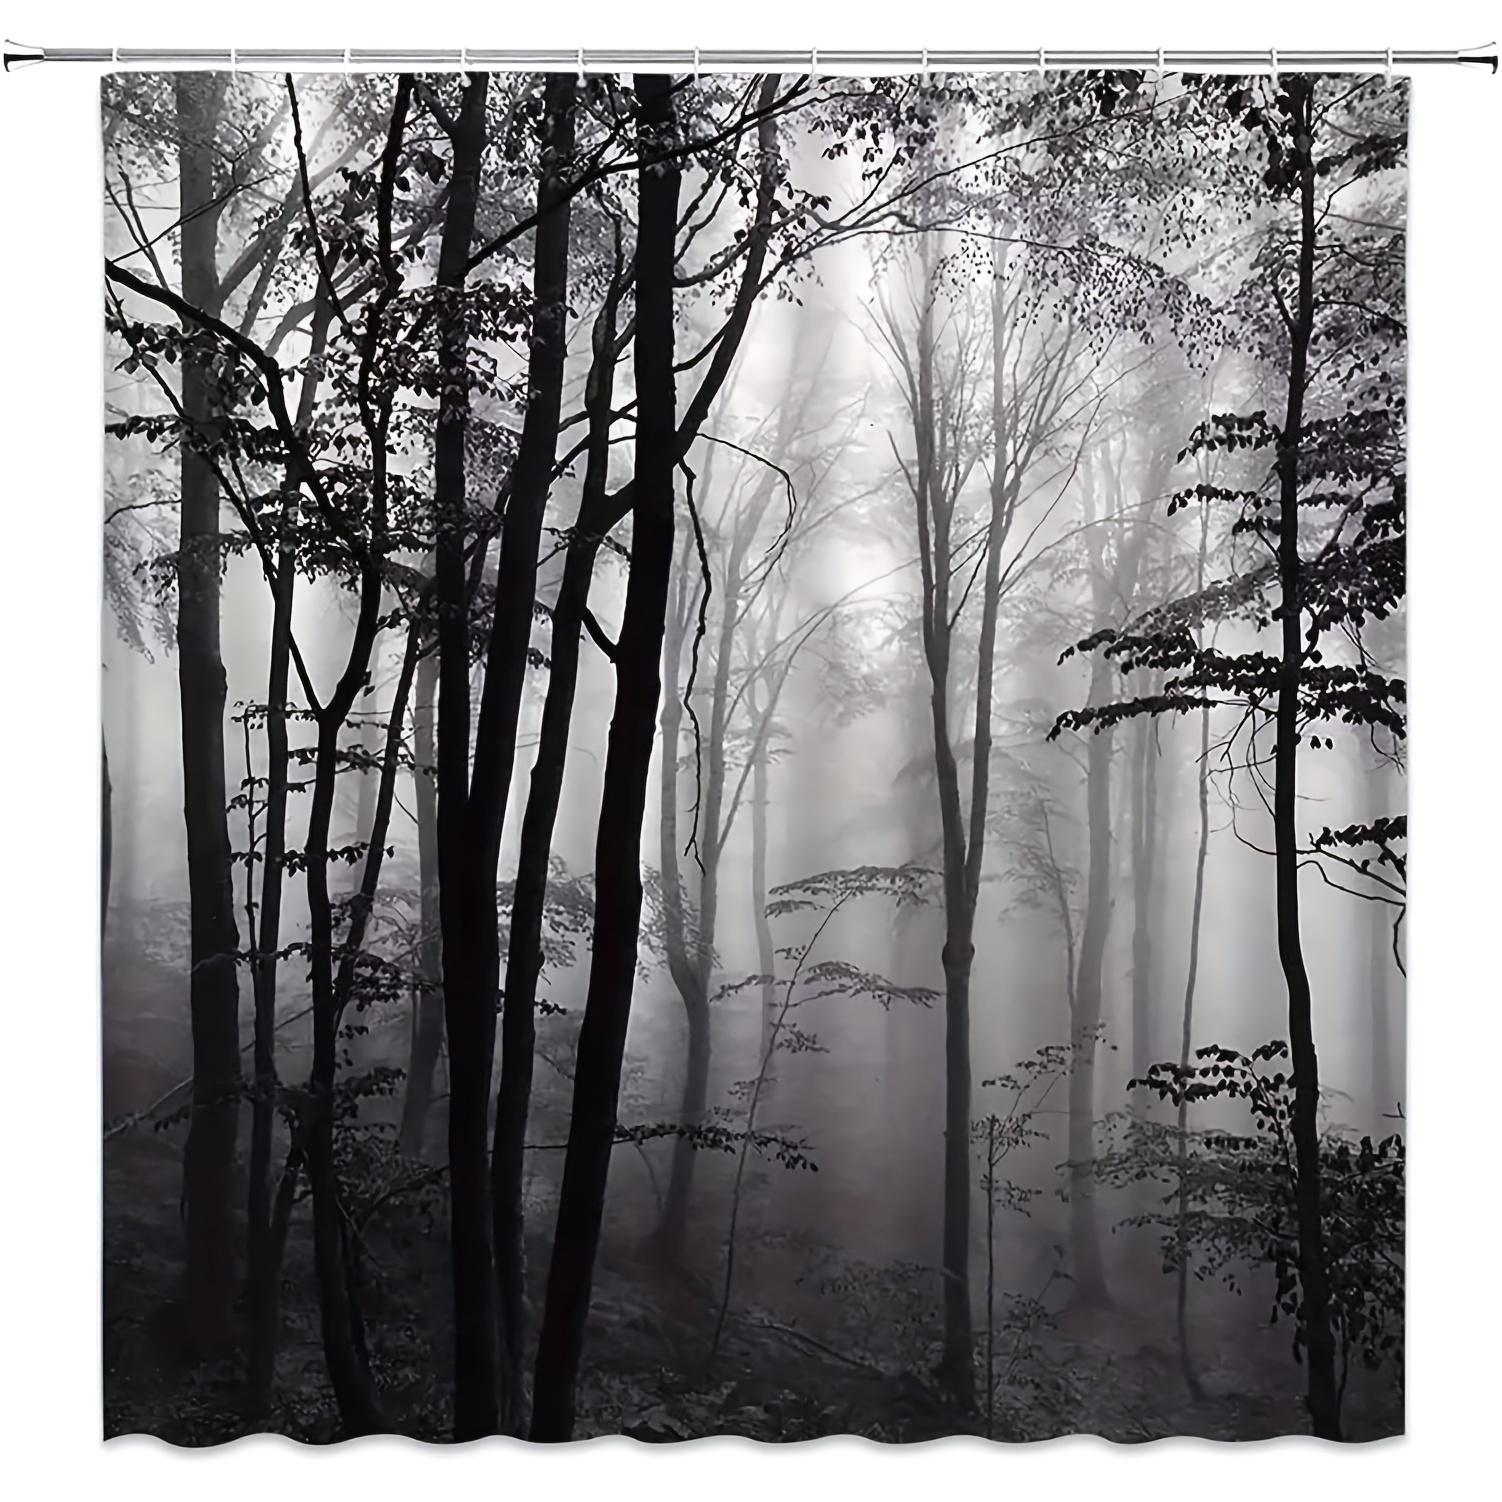 1pc Forest Theme Shower Curtain - Black & White Wood With Foggy Pattern -  Waterproof And Mildew-Proof Fabric - Perfect For Home Decor And Bathroom Upg